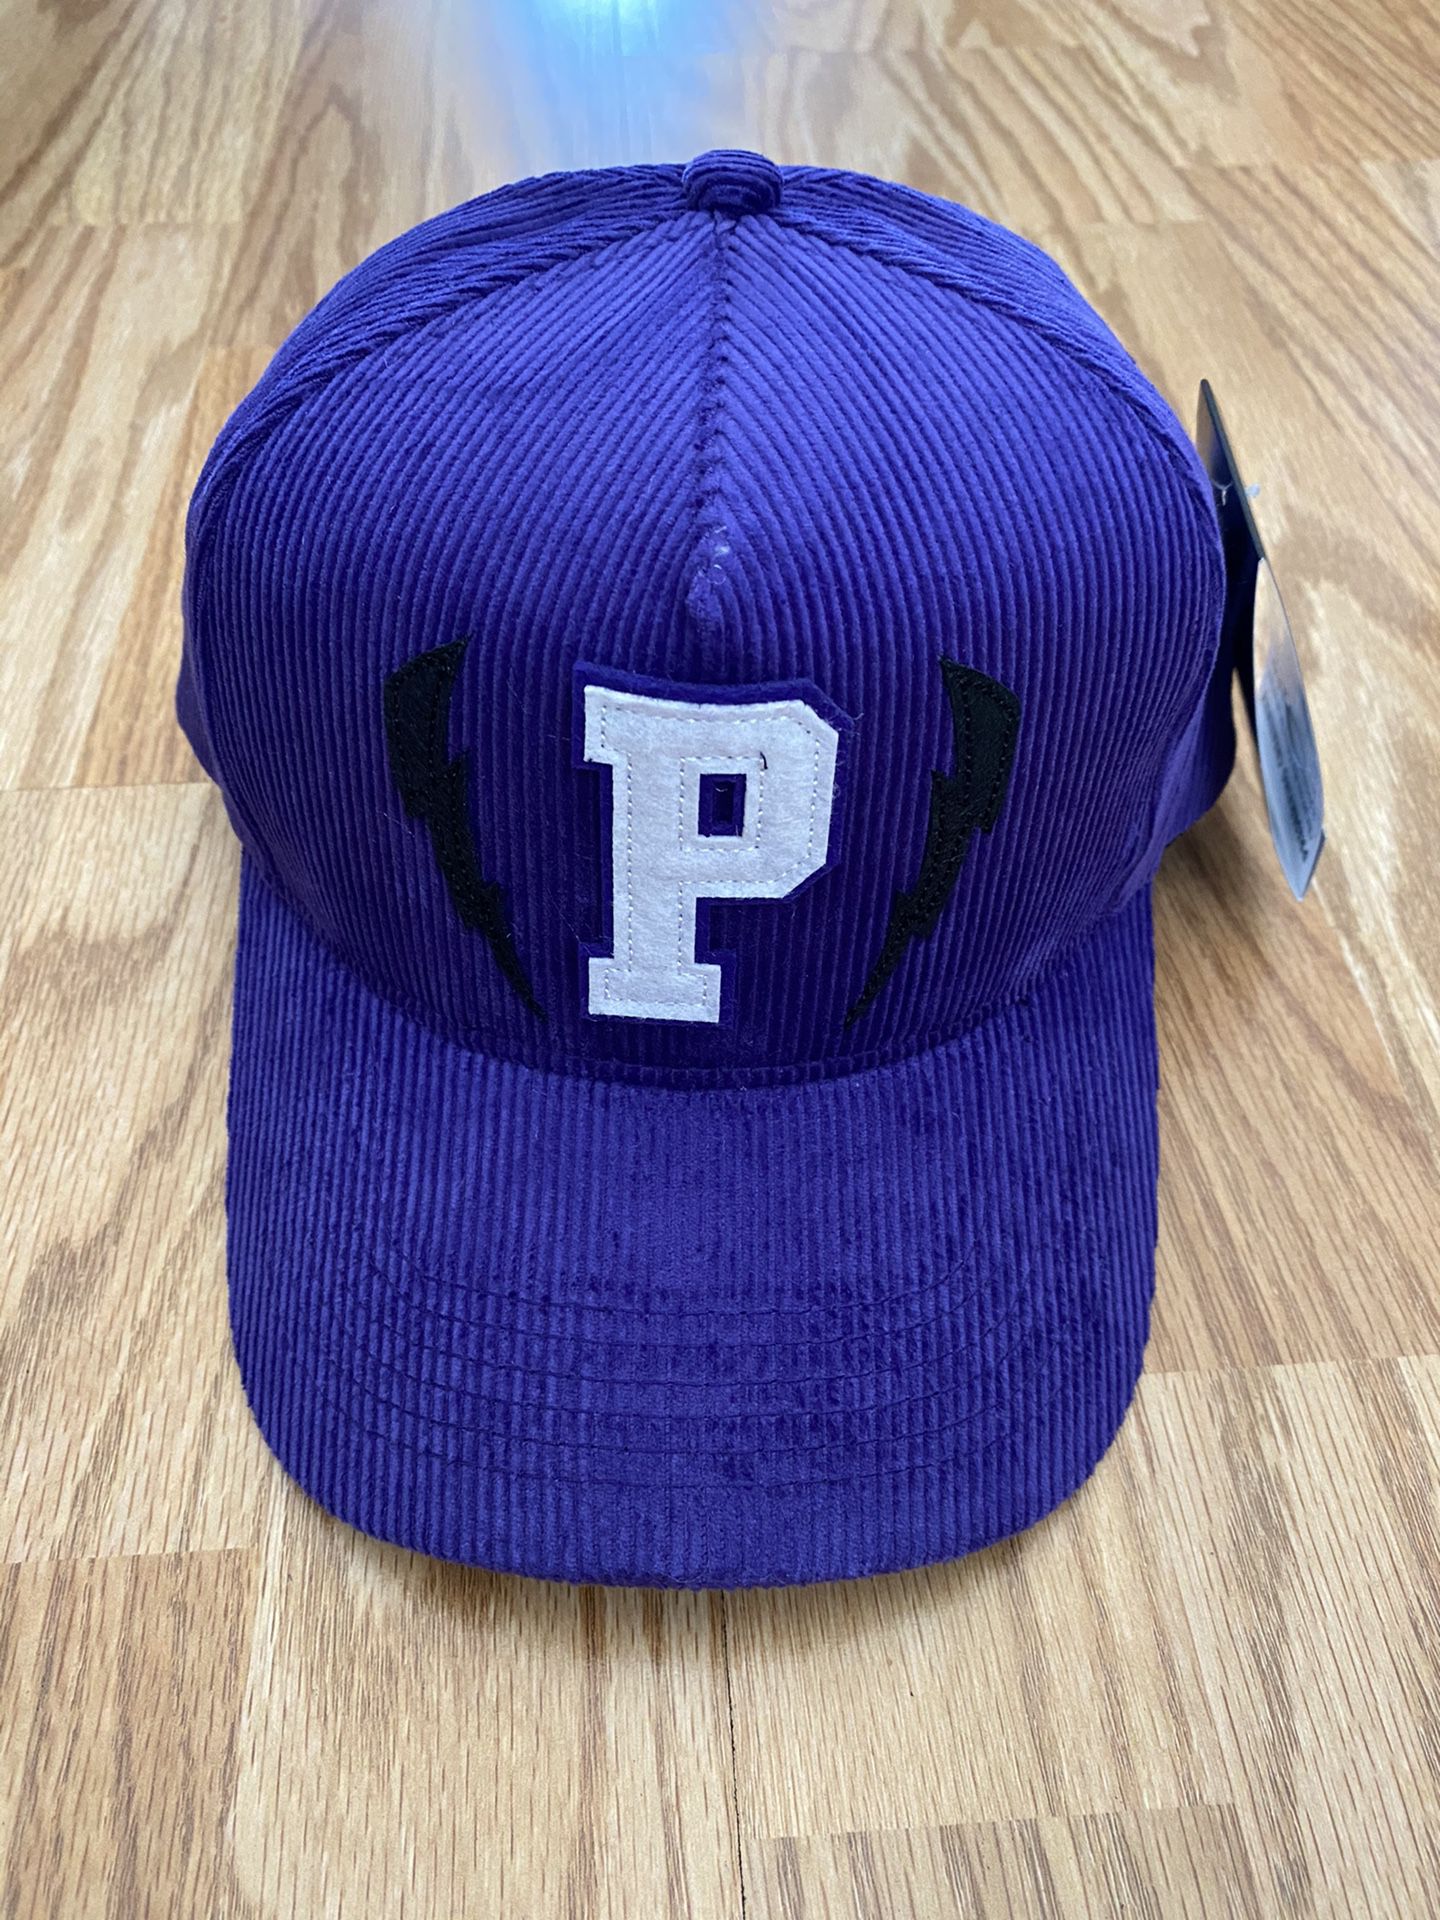 NEW PINK DOLPHIN CORDUROY LIGHTNING P HAT IN PURPLE **SOLD OUT STYLE**